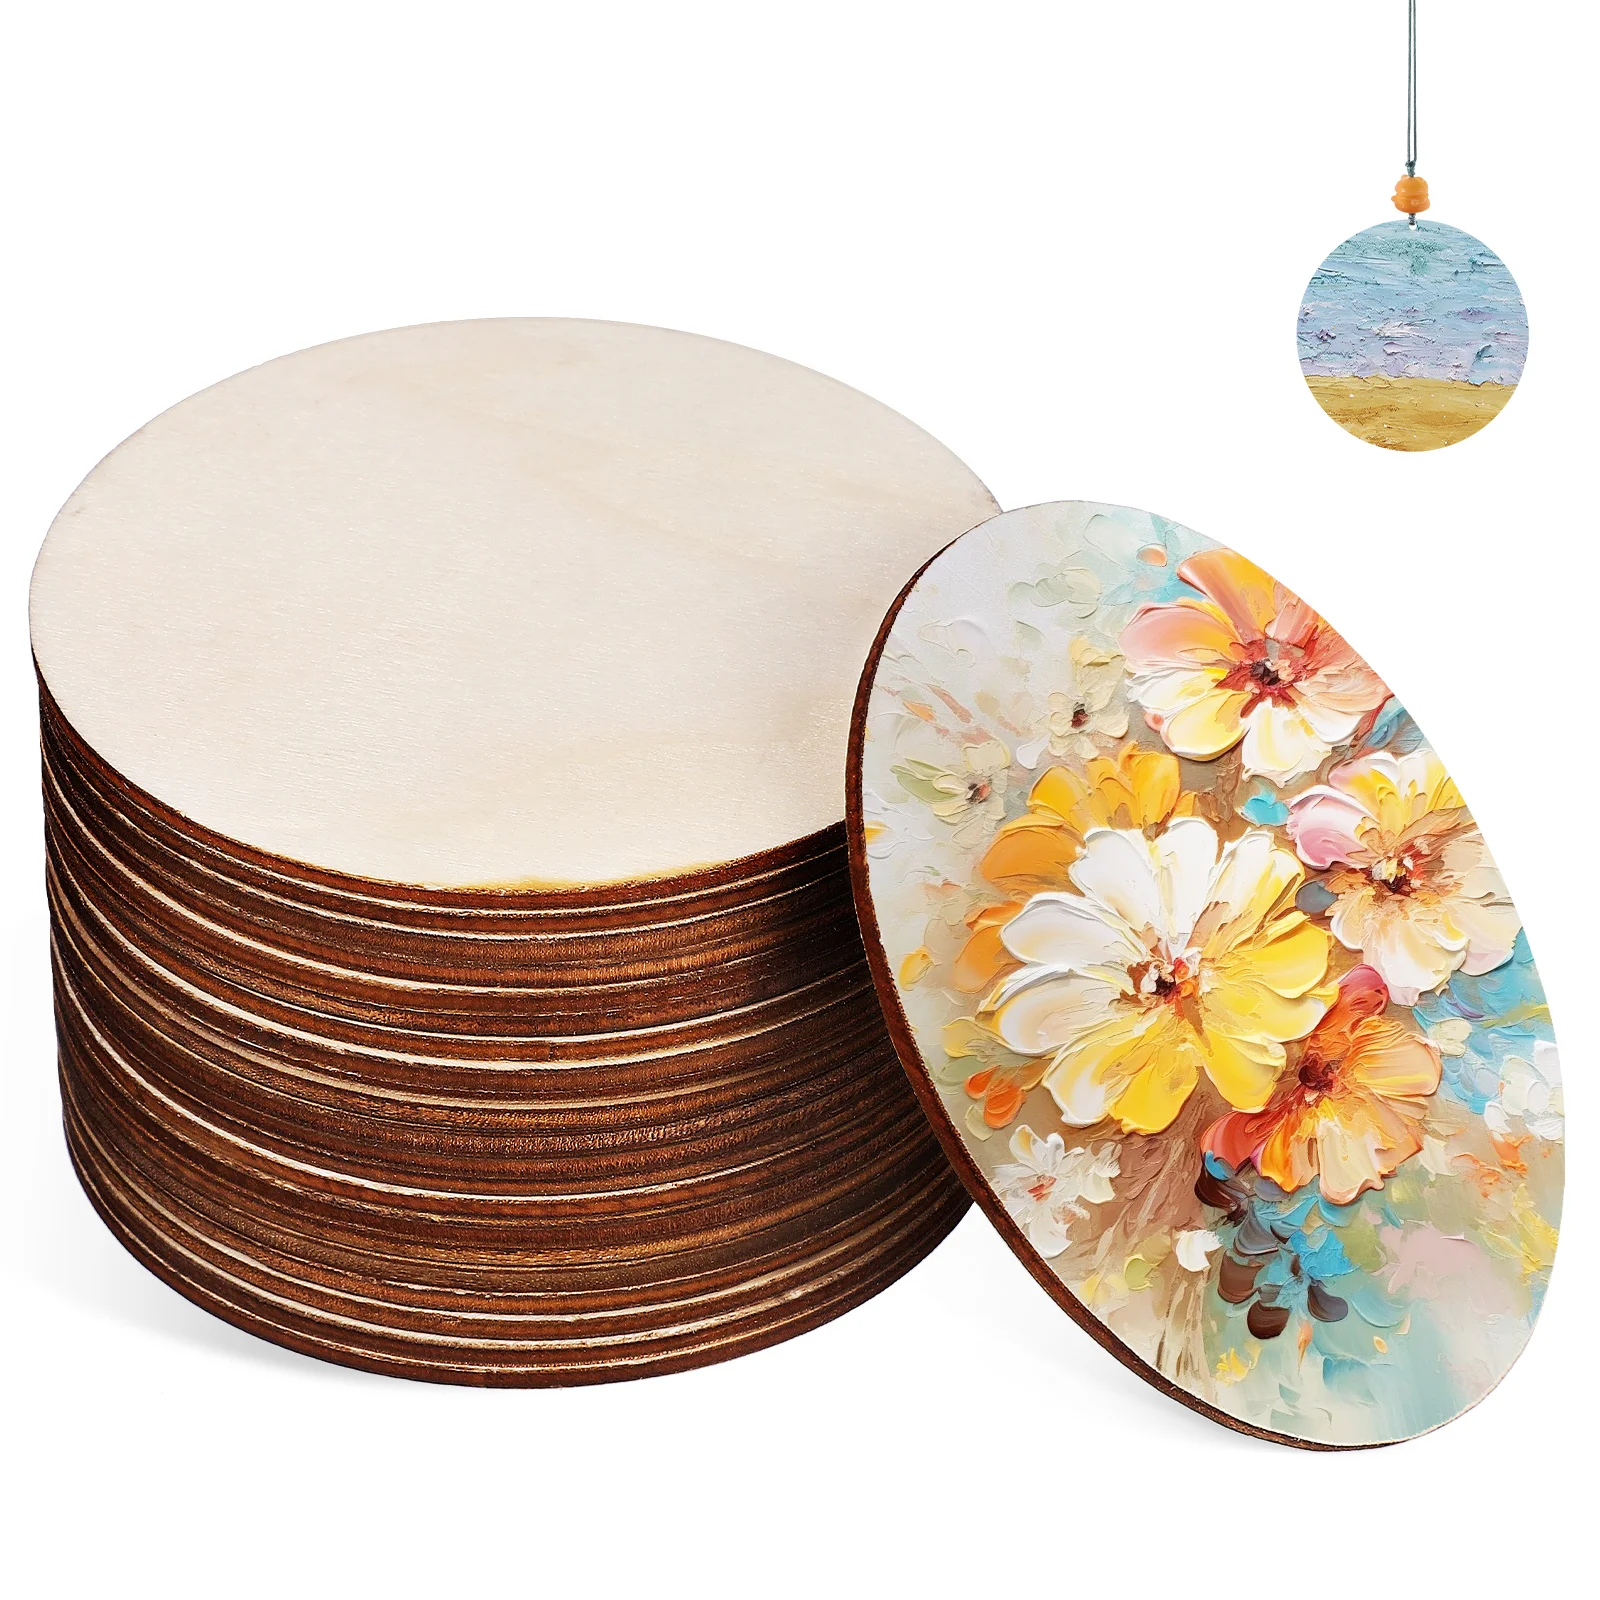 

20 Pcs Wooden Circles Wooden Discs Wood Rounds For Crafts Natural Round Wood Slices For Centerpieces